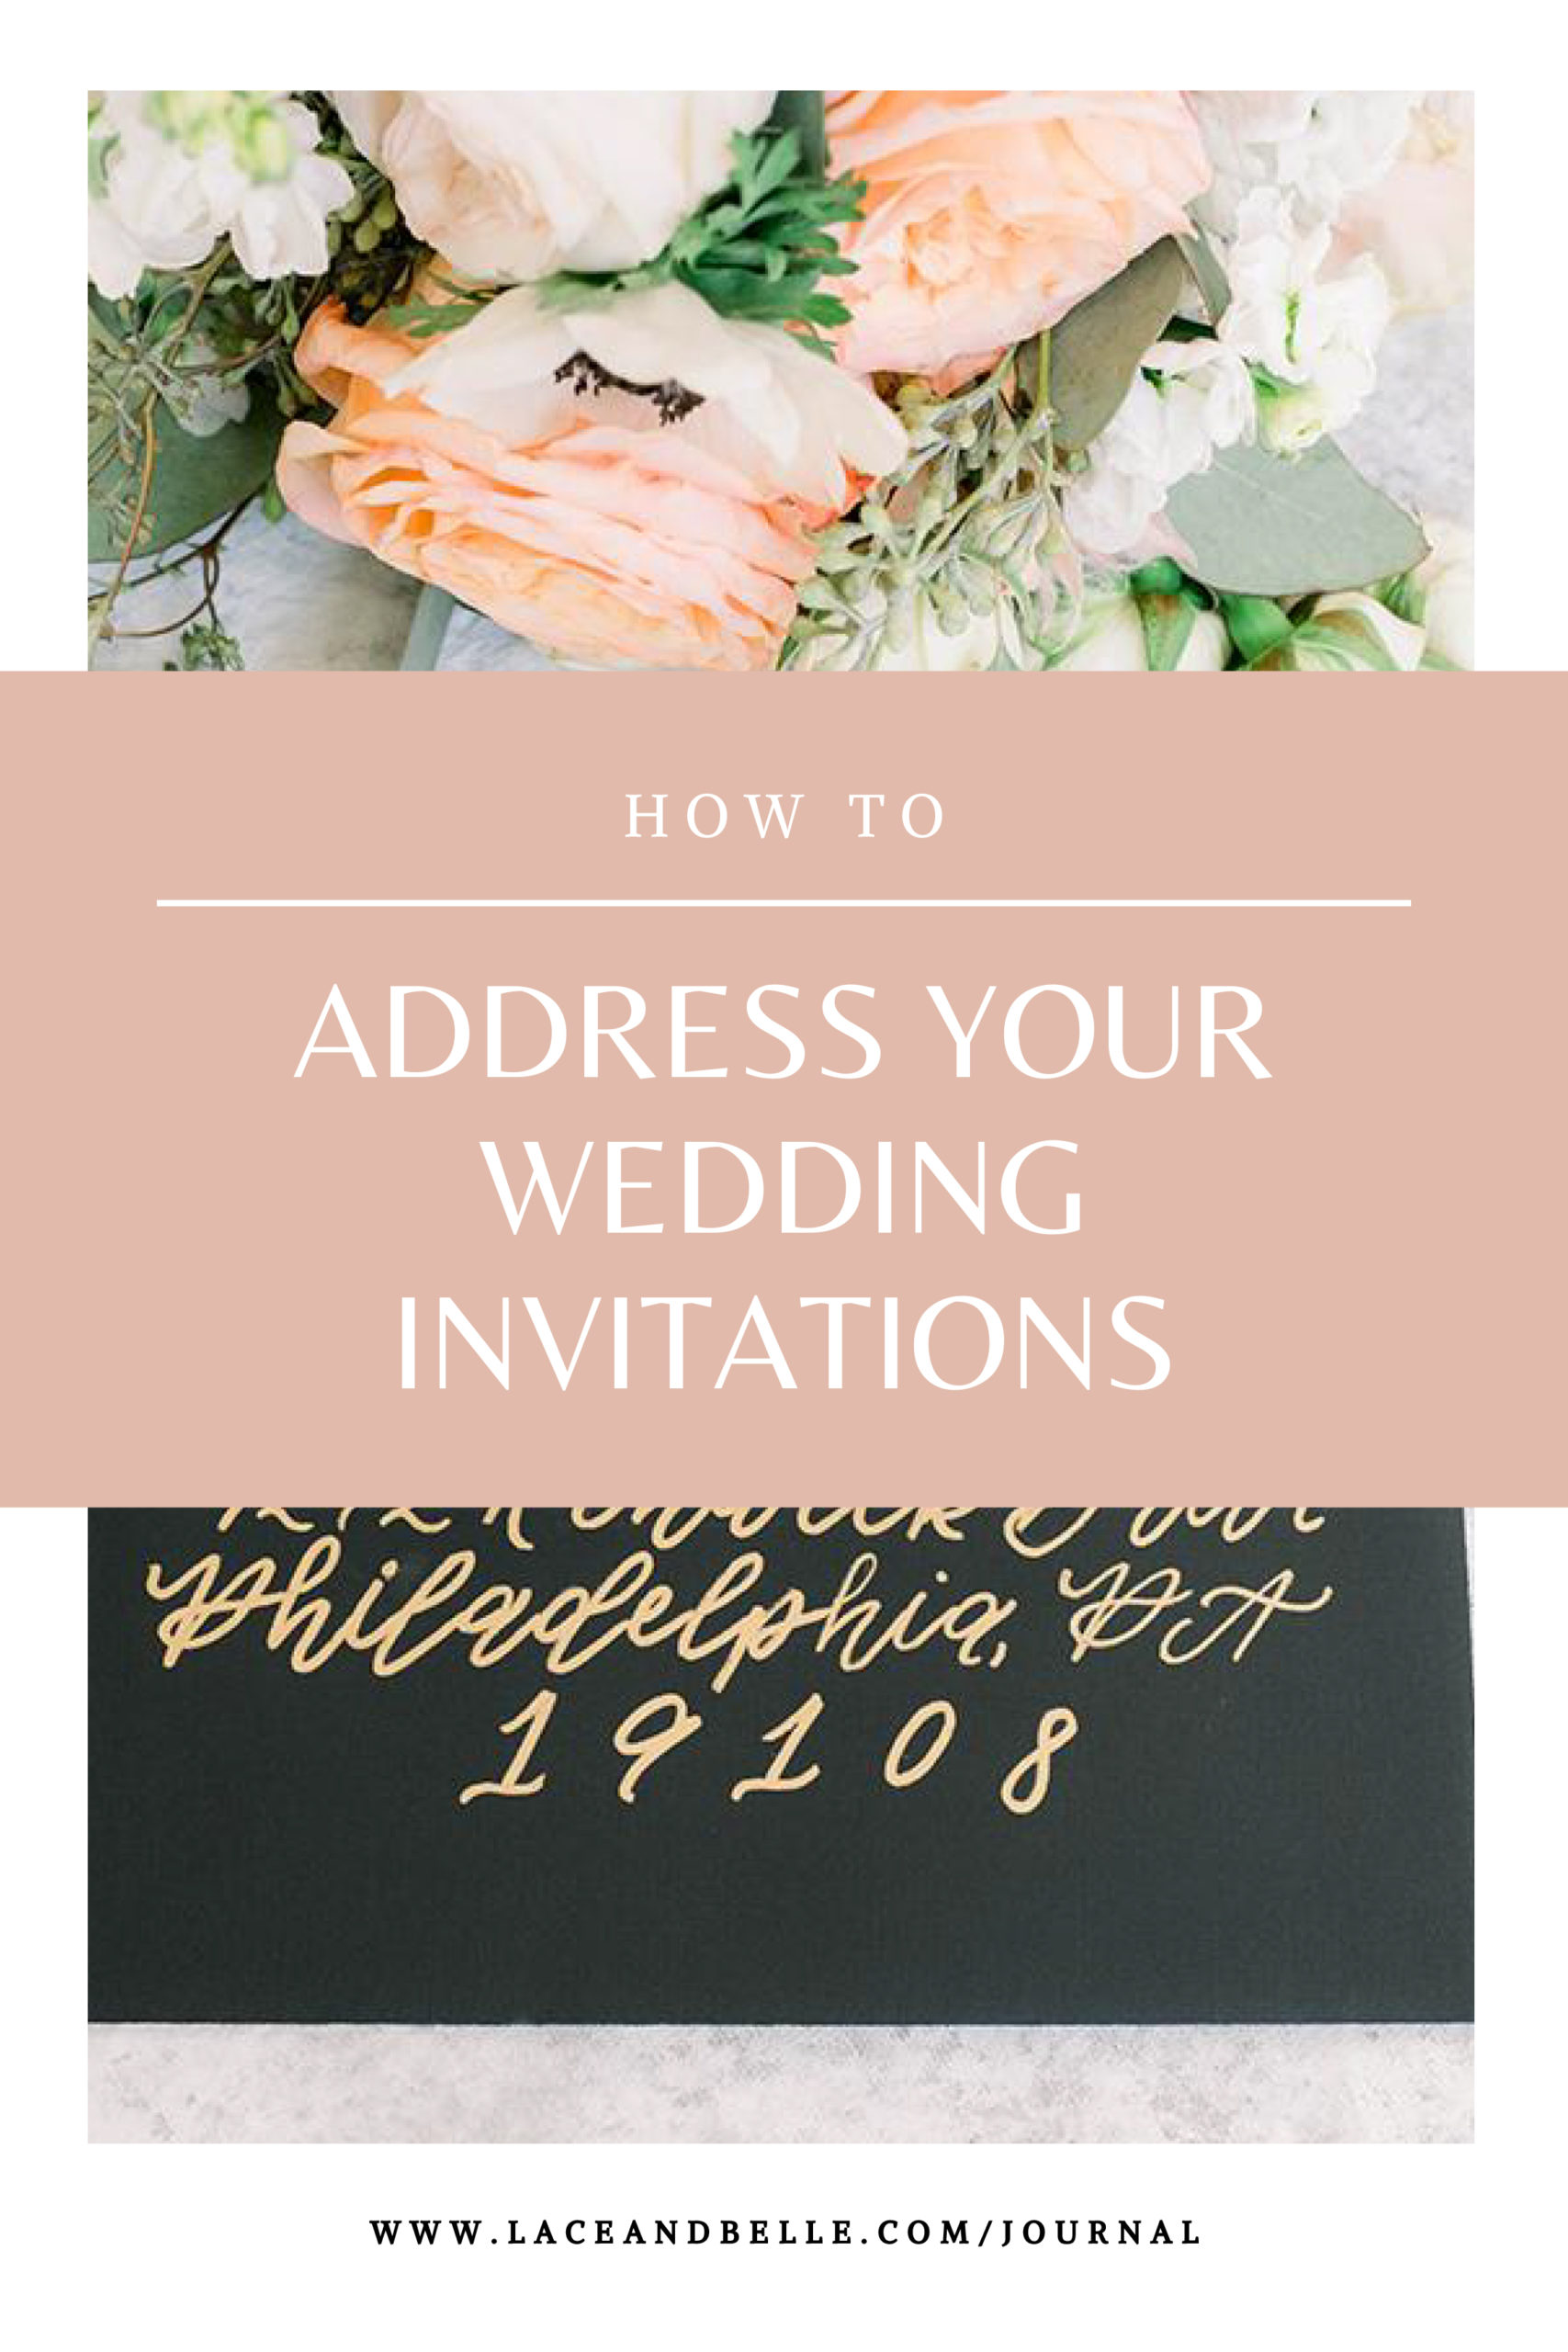 Lace and Belle’s Guide to Addressing your Wedding Invitations ...